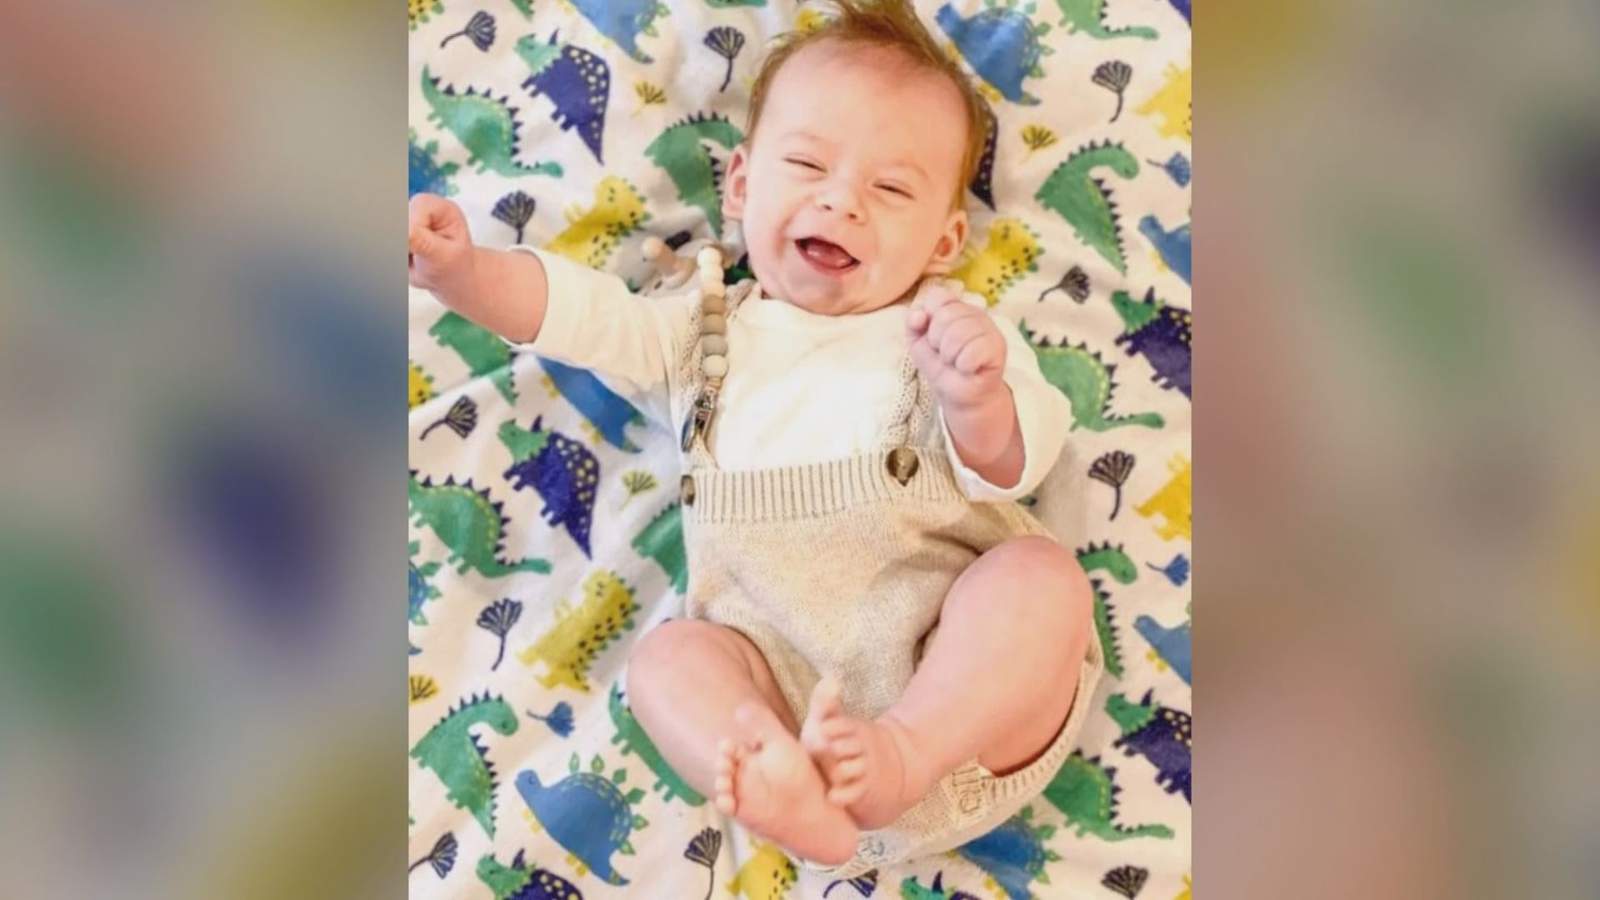 Anonymous donor to match donations to help save 3-month-old boy from rare genetic disorder